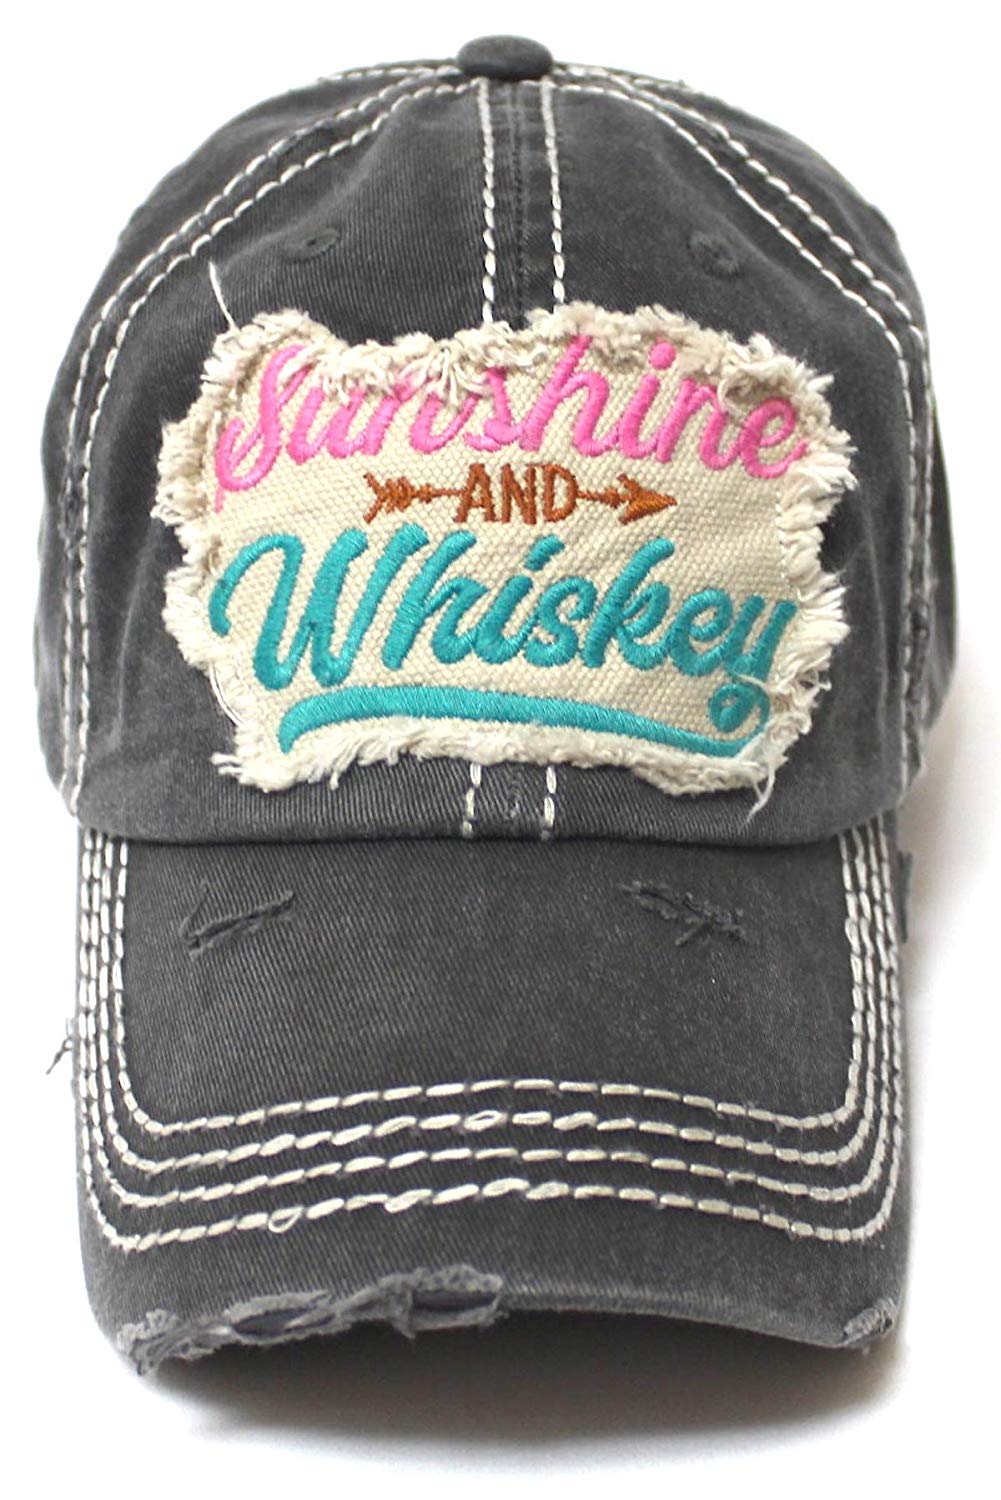 Women's Ballcap Sunshine and Whiskey Tribal Arrow Patch Embroidery Hat, Graphite - Caps 'N Vintage 